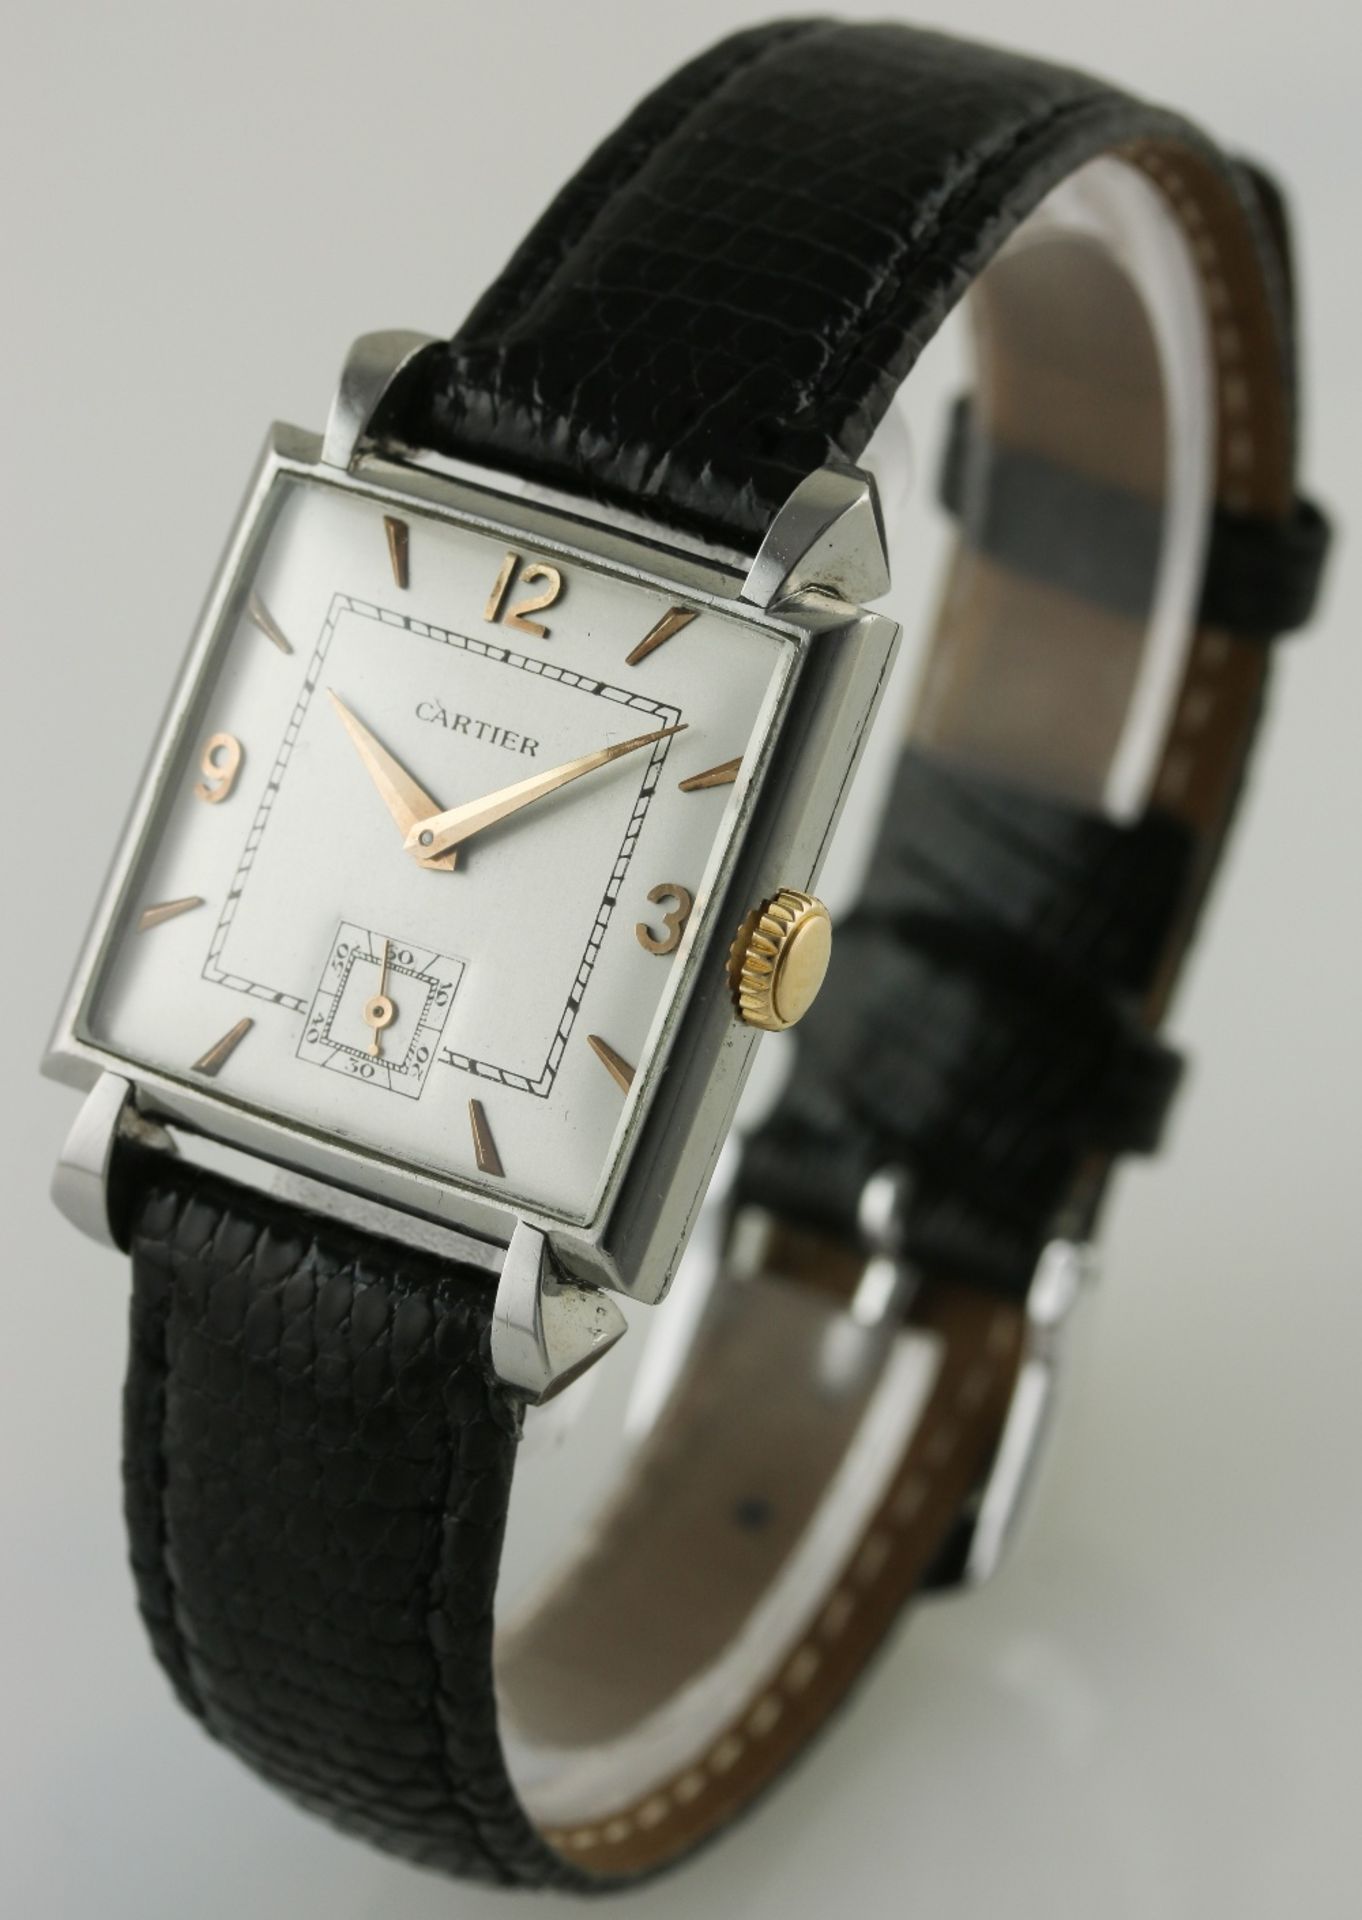 A GENTLEMAN'S STAINLESS STEEL CARTIER WRIST WATCH CIRCA 1950, MADE BY JAEGER-LECOULTRE D: Silver - Image 4 of 8